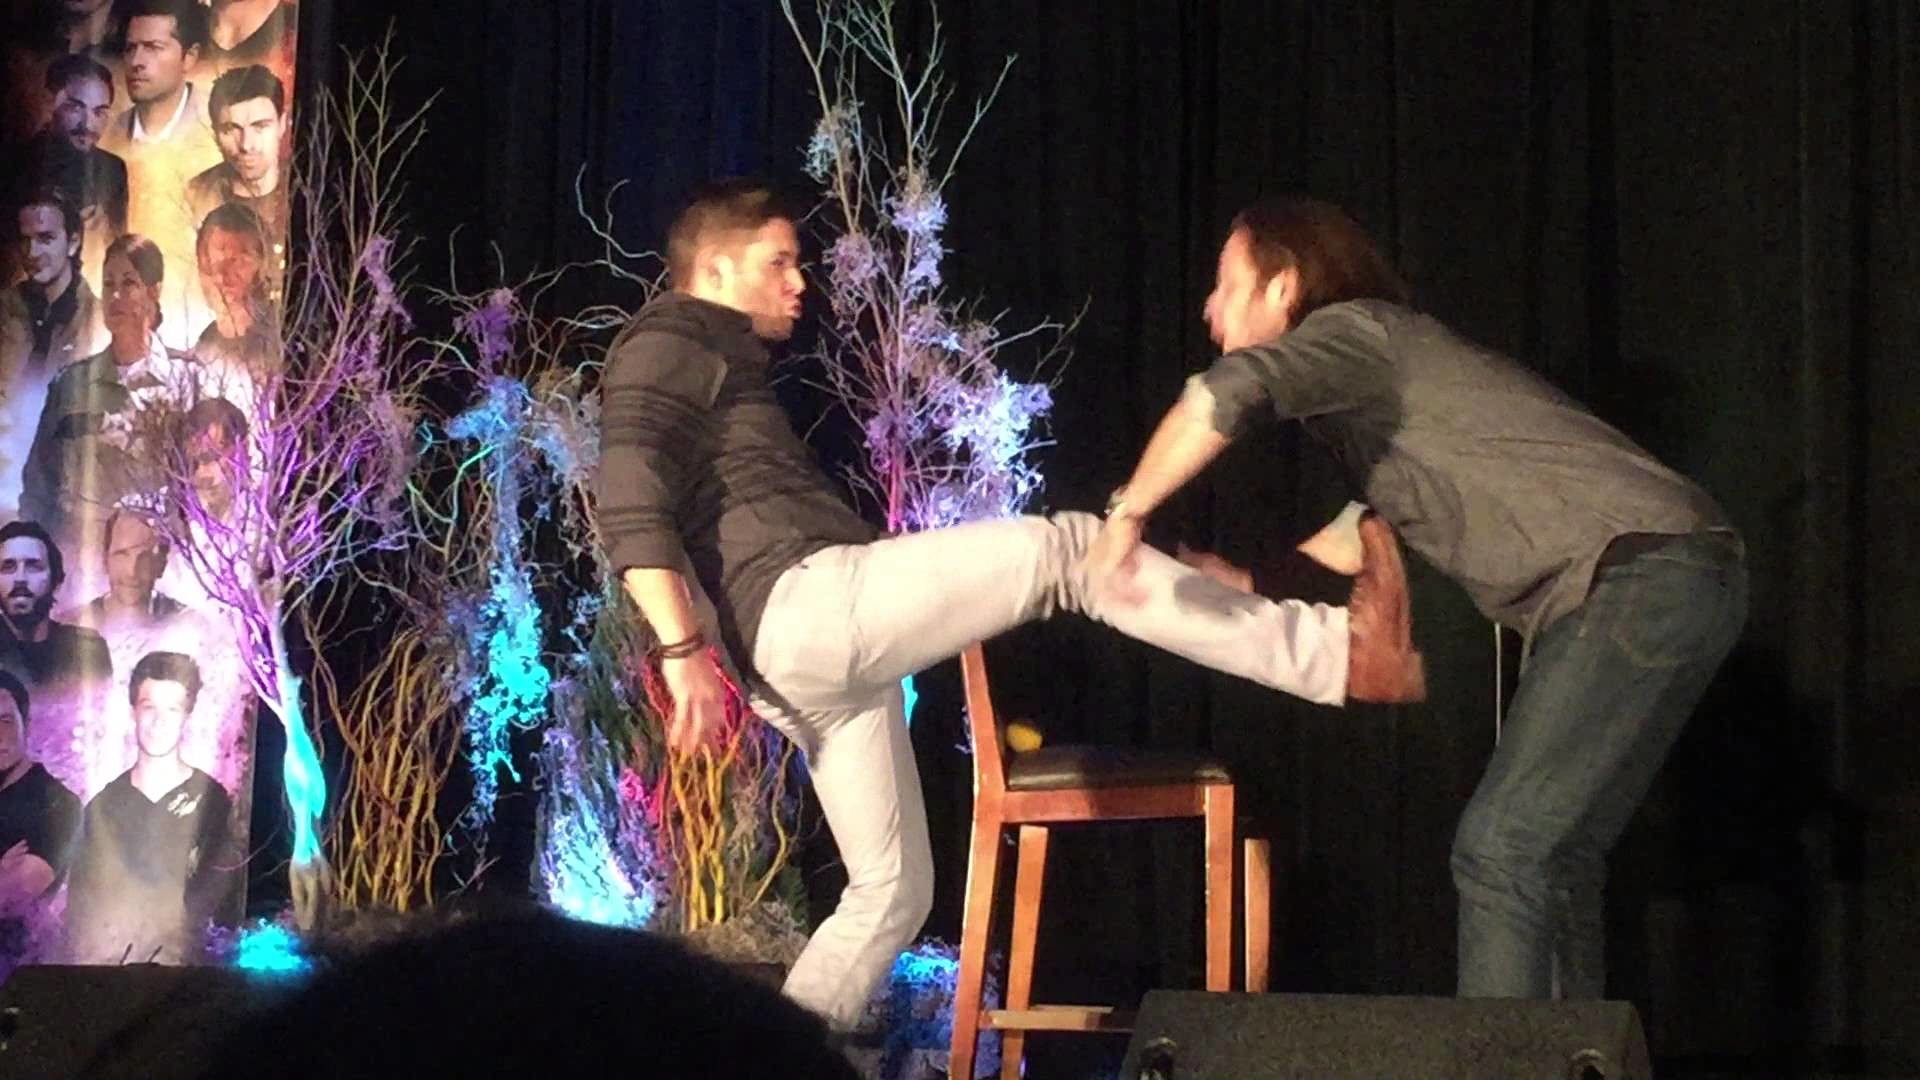 1920x1080 Jared Padalecki and Jensen Ackles - slow motion fight - Houston Convention  2015 - YouTube